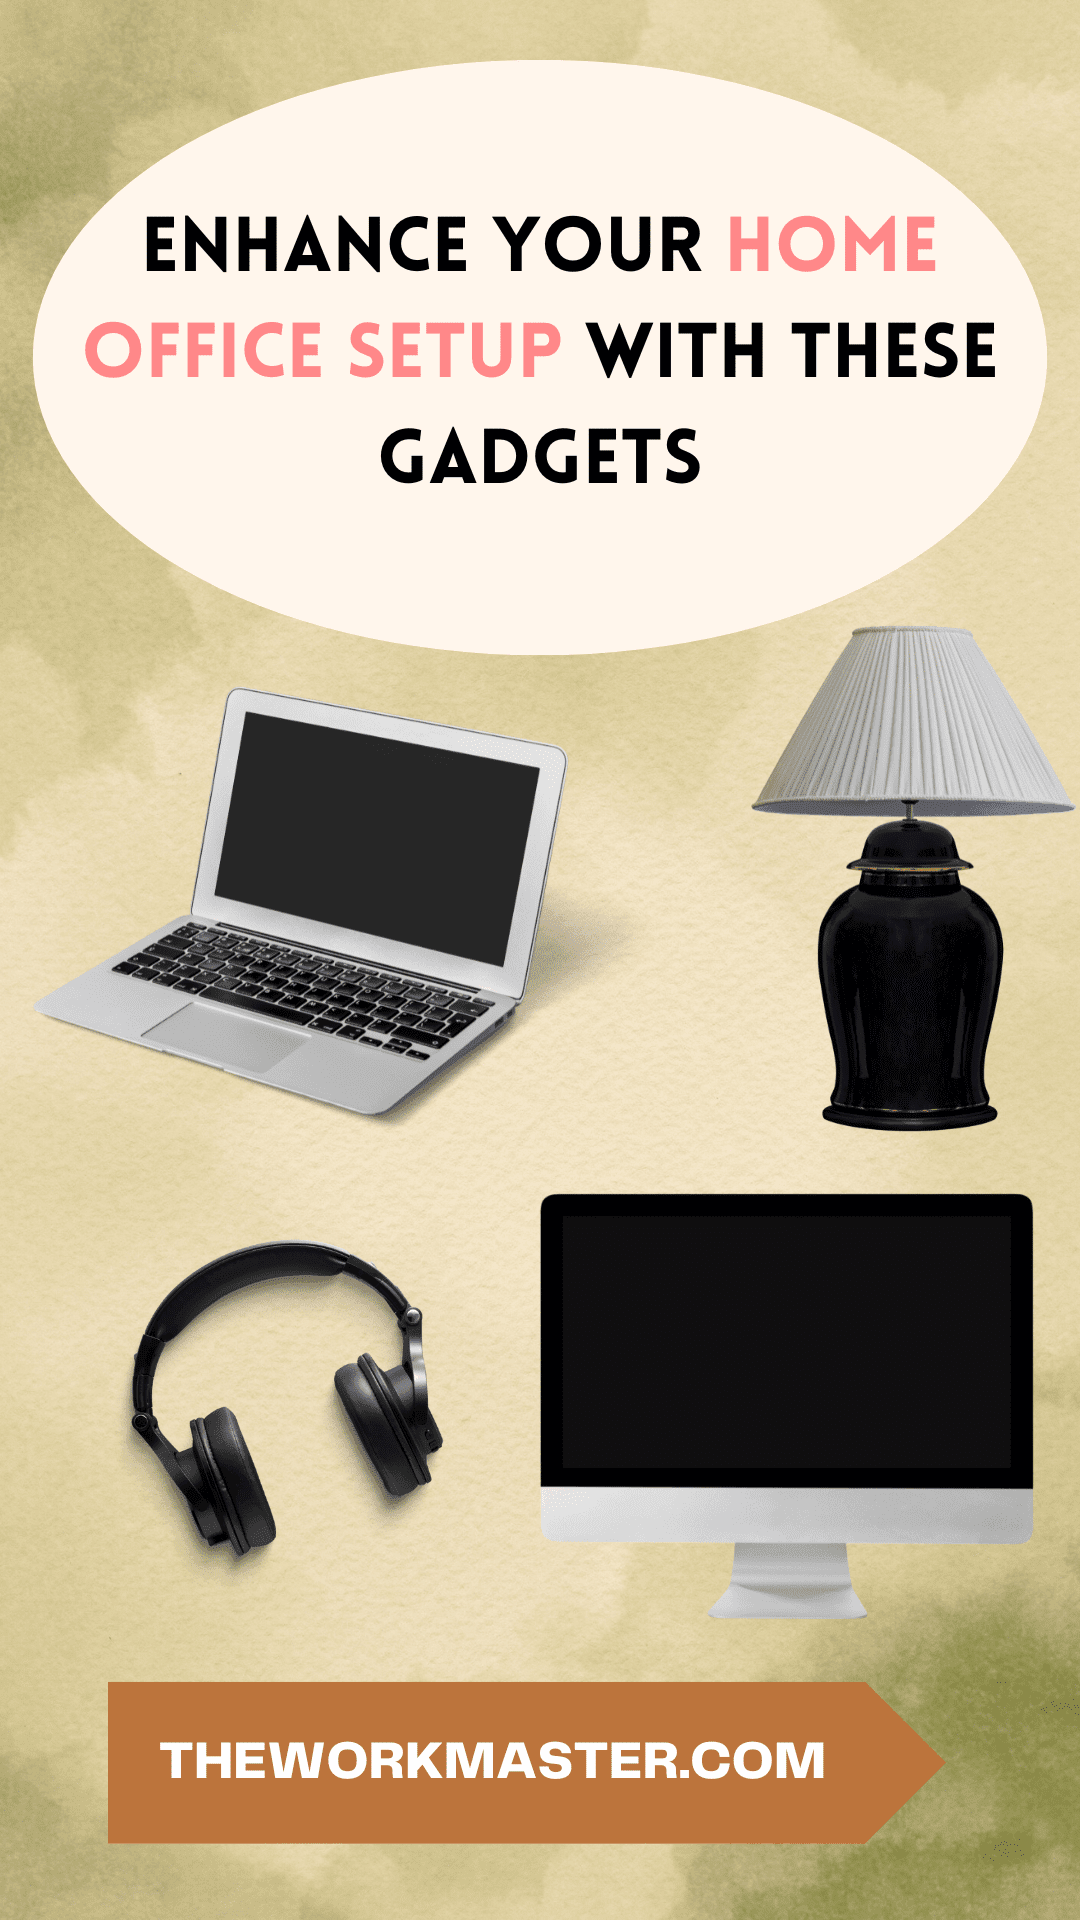 The text "Enhance Your Home Office Setup with these Gadgets" and photos of a headset, a monitor, a laptop and an office lamp